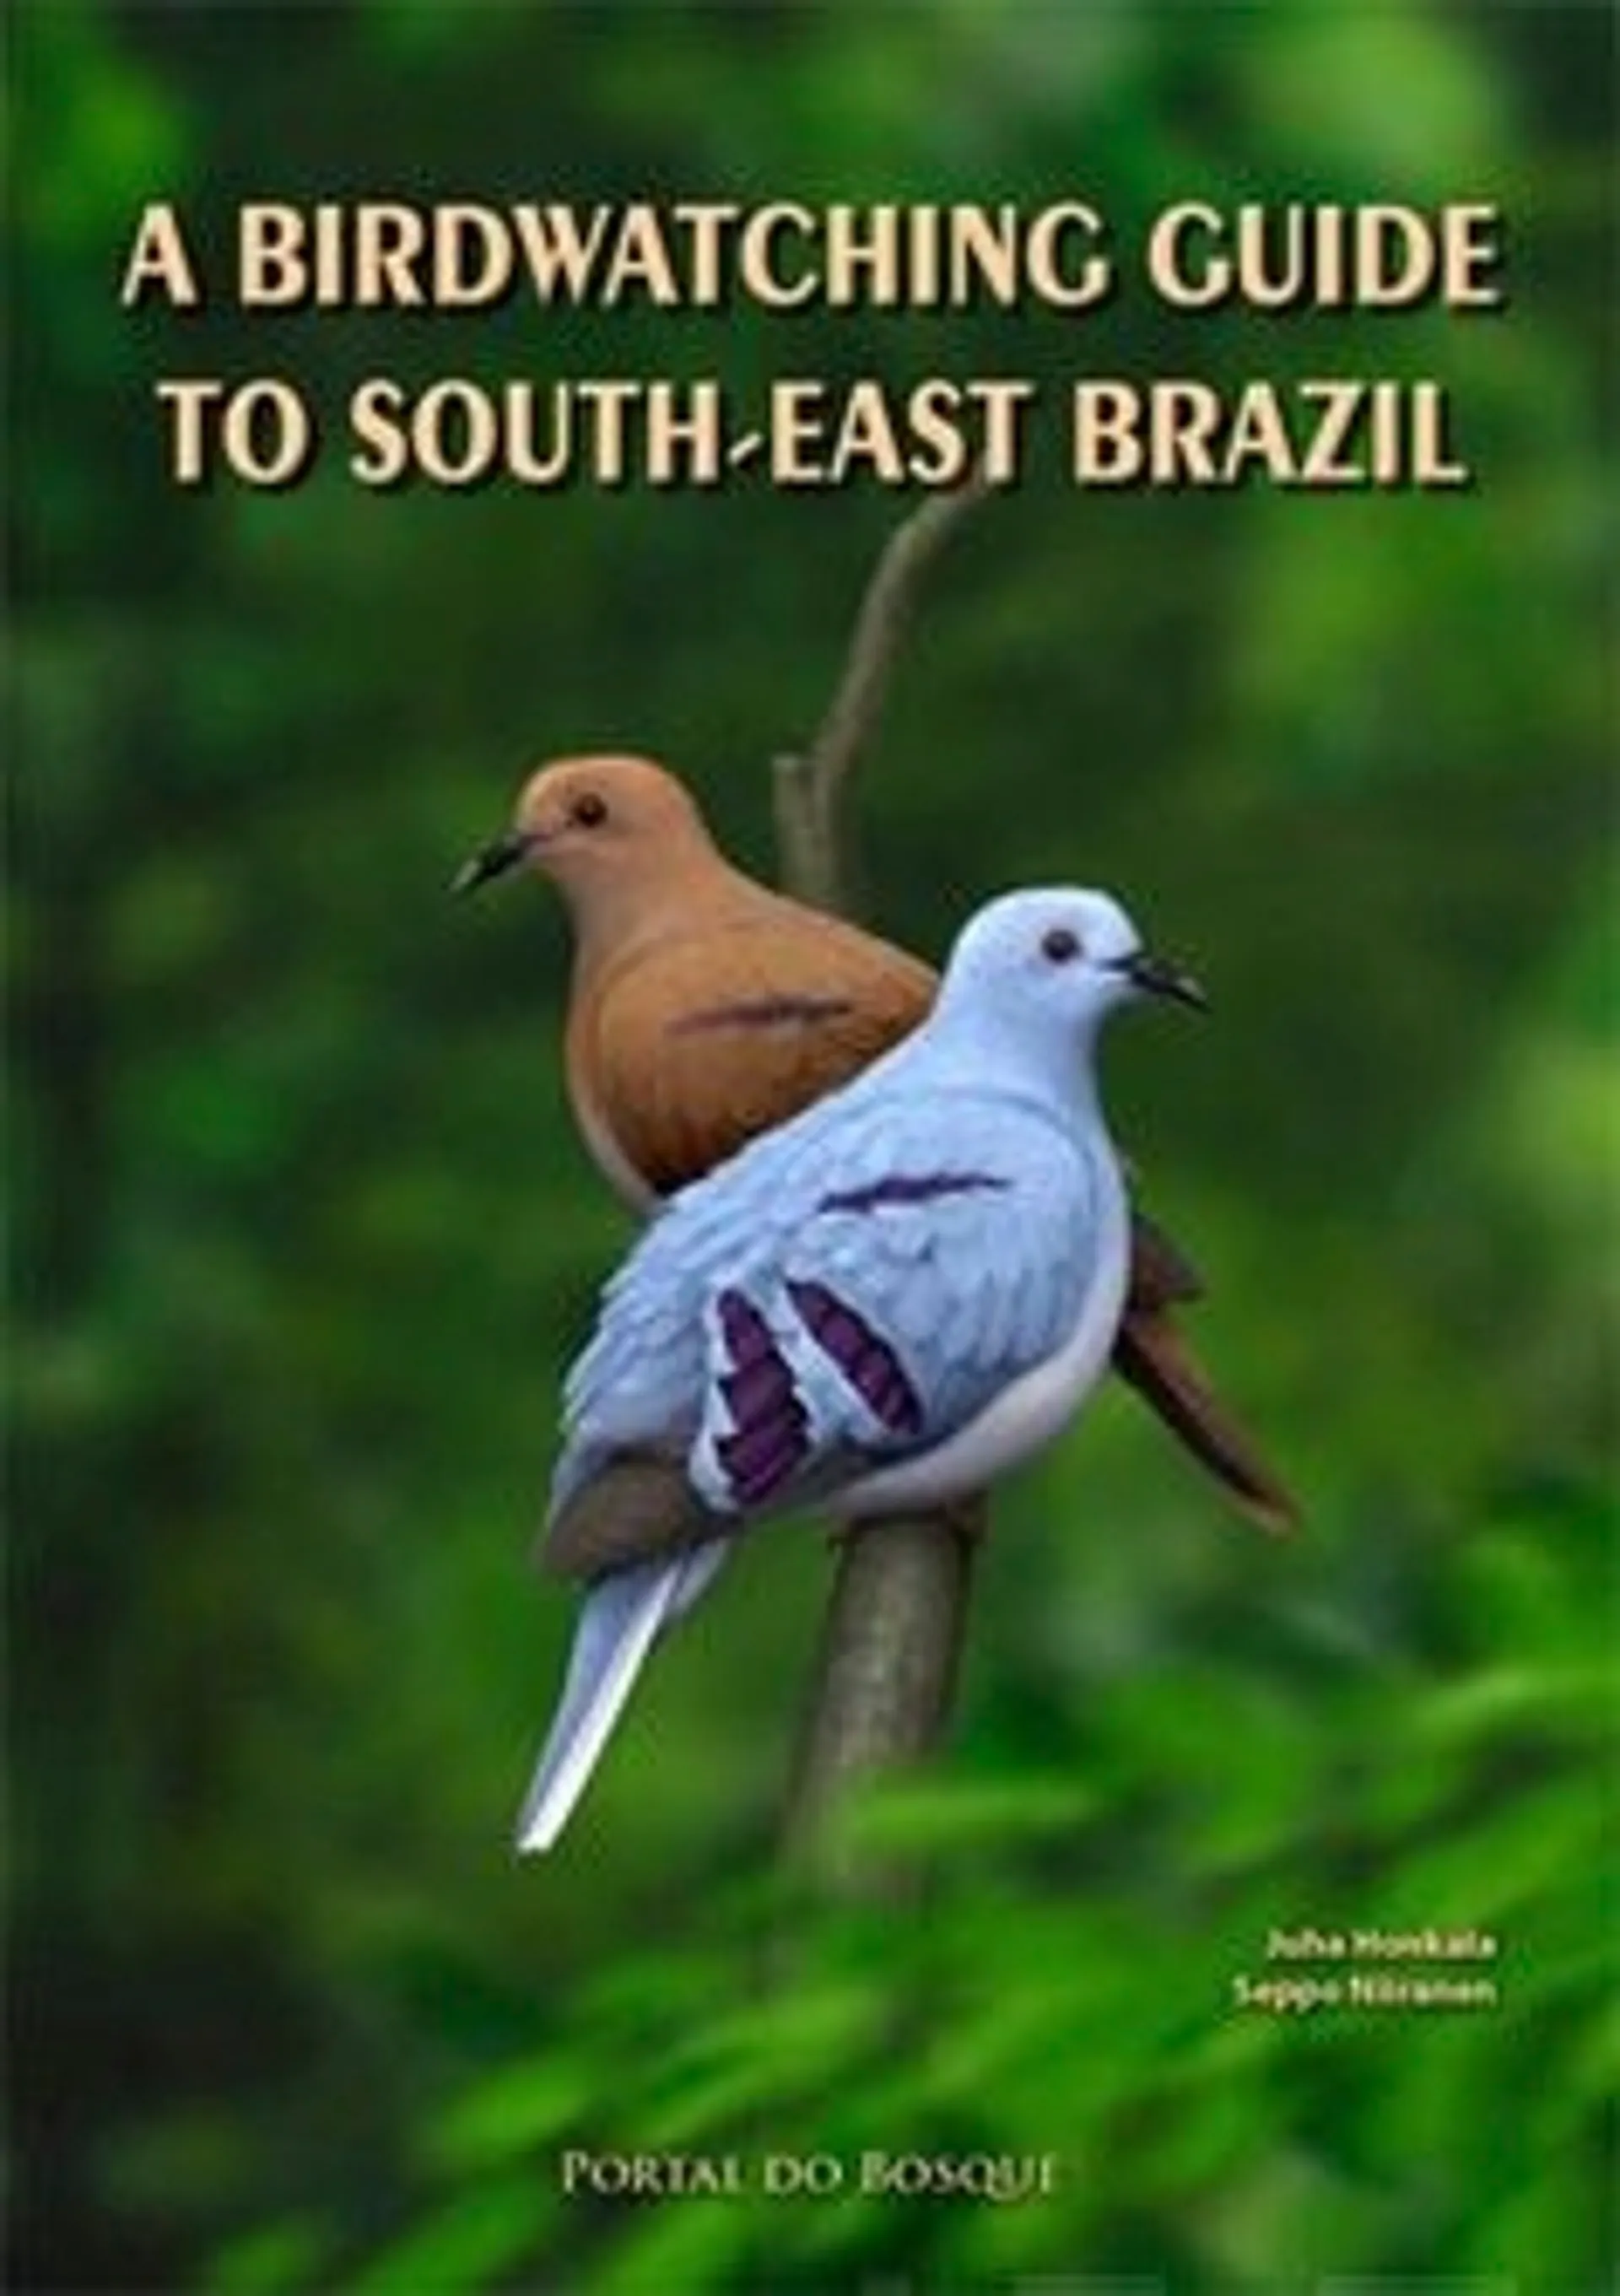 Honkala, A Birdwatching Guide to South-East Brazil